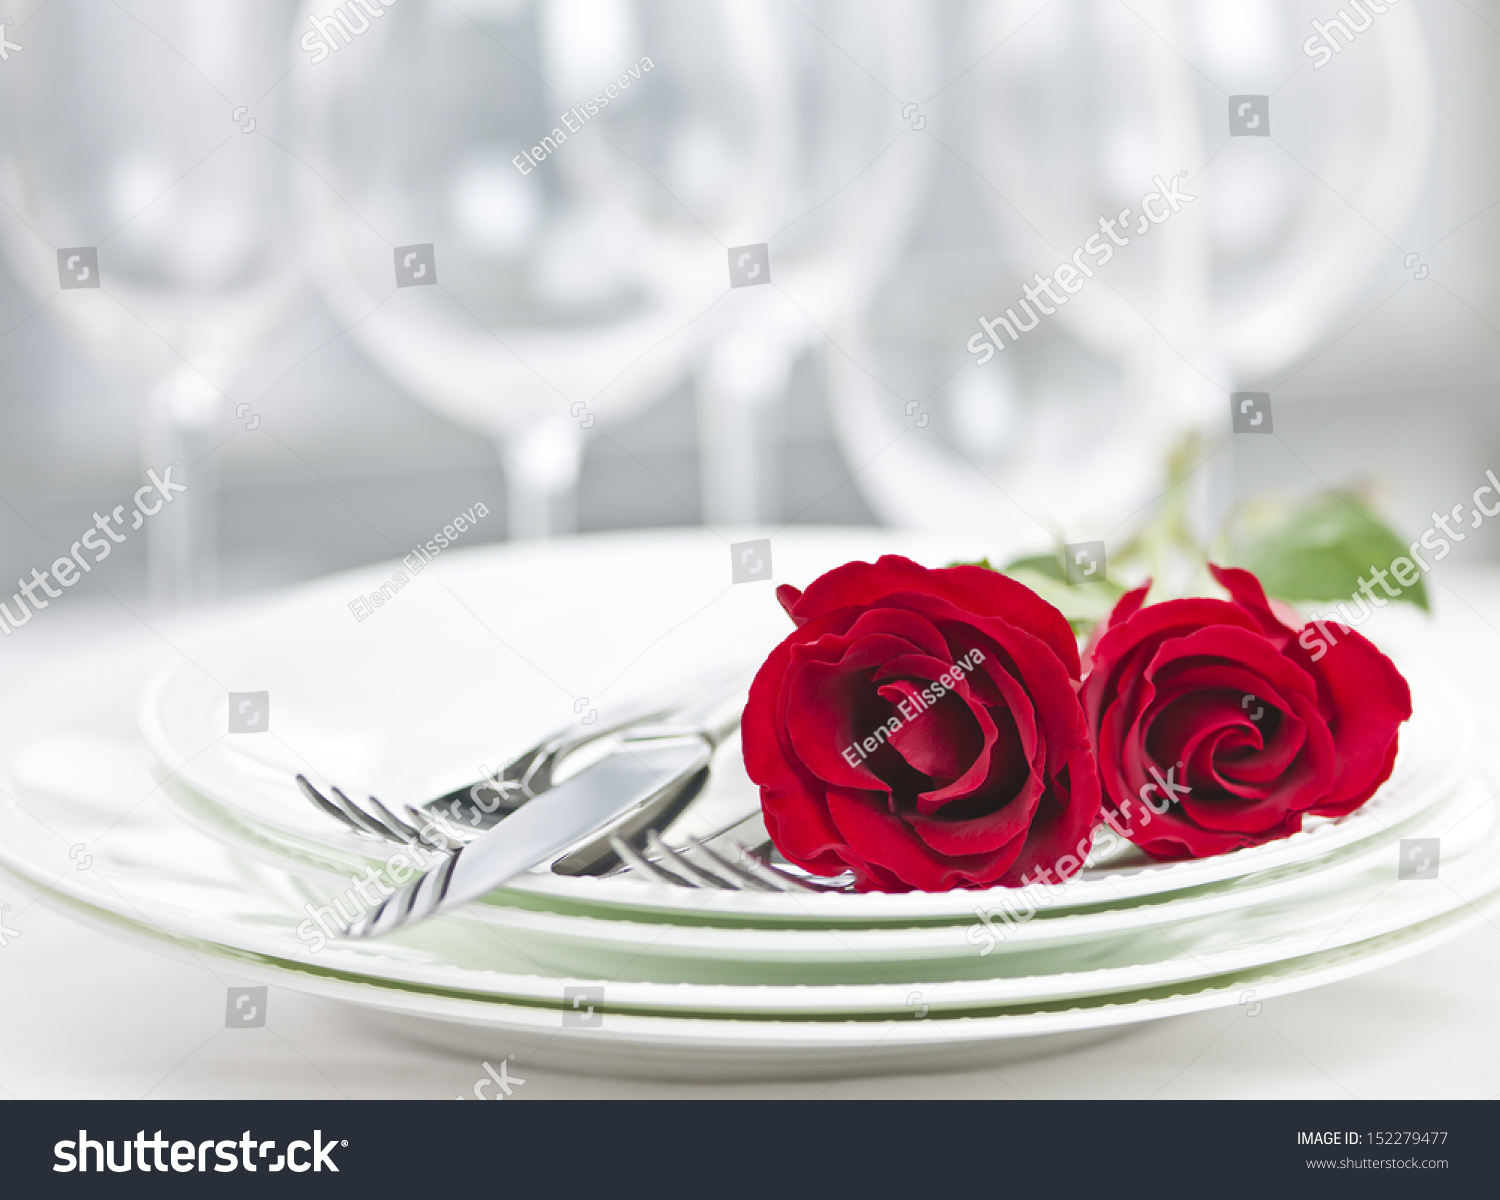 Romantic restaurant table setting for two with roses plates and cutlery #152279477